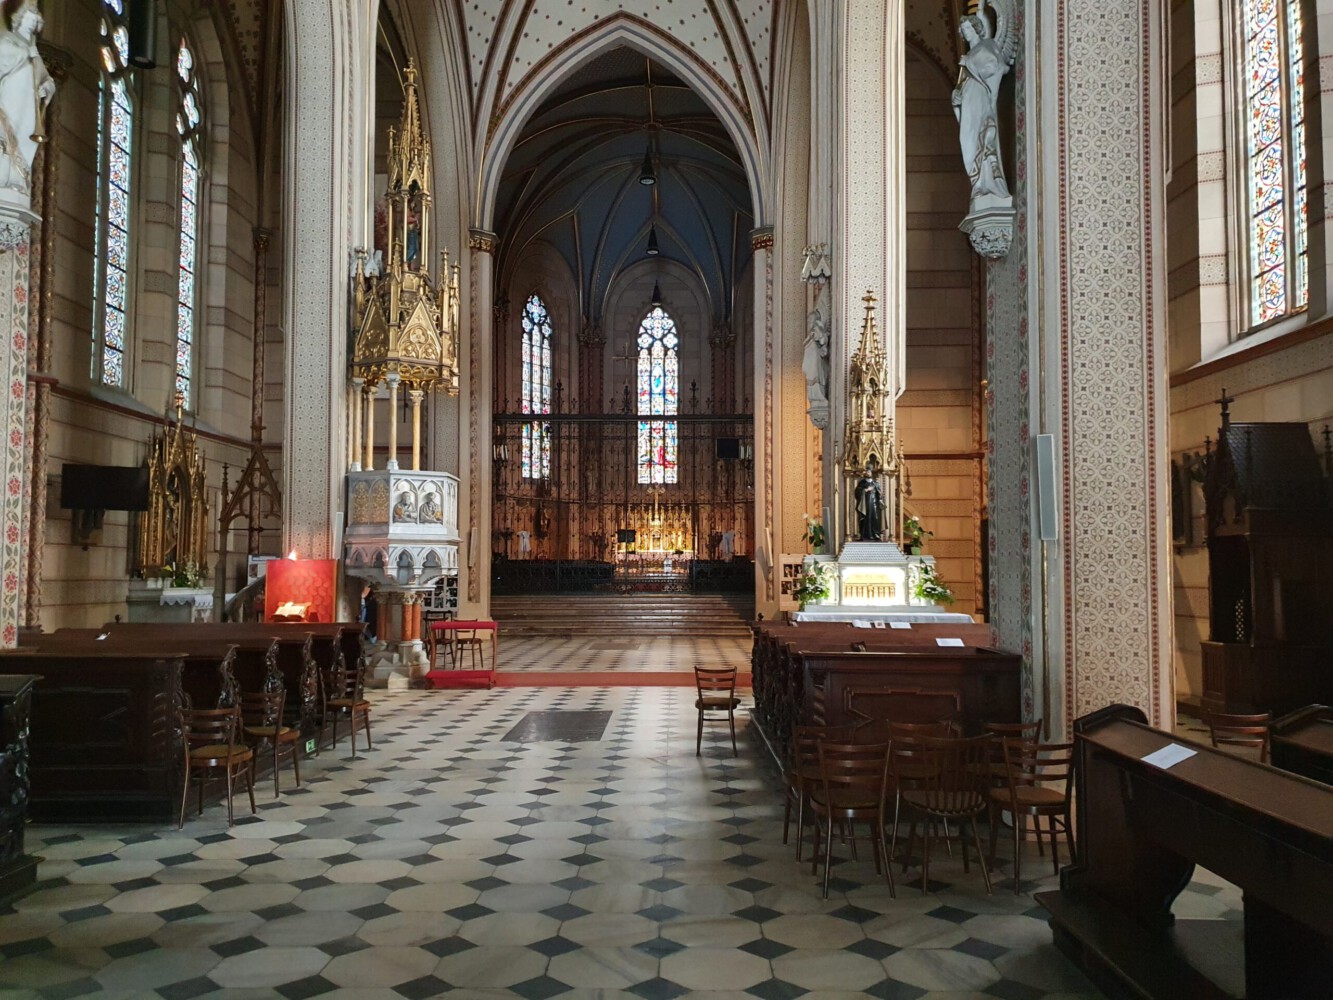 The cathedral from the inside.